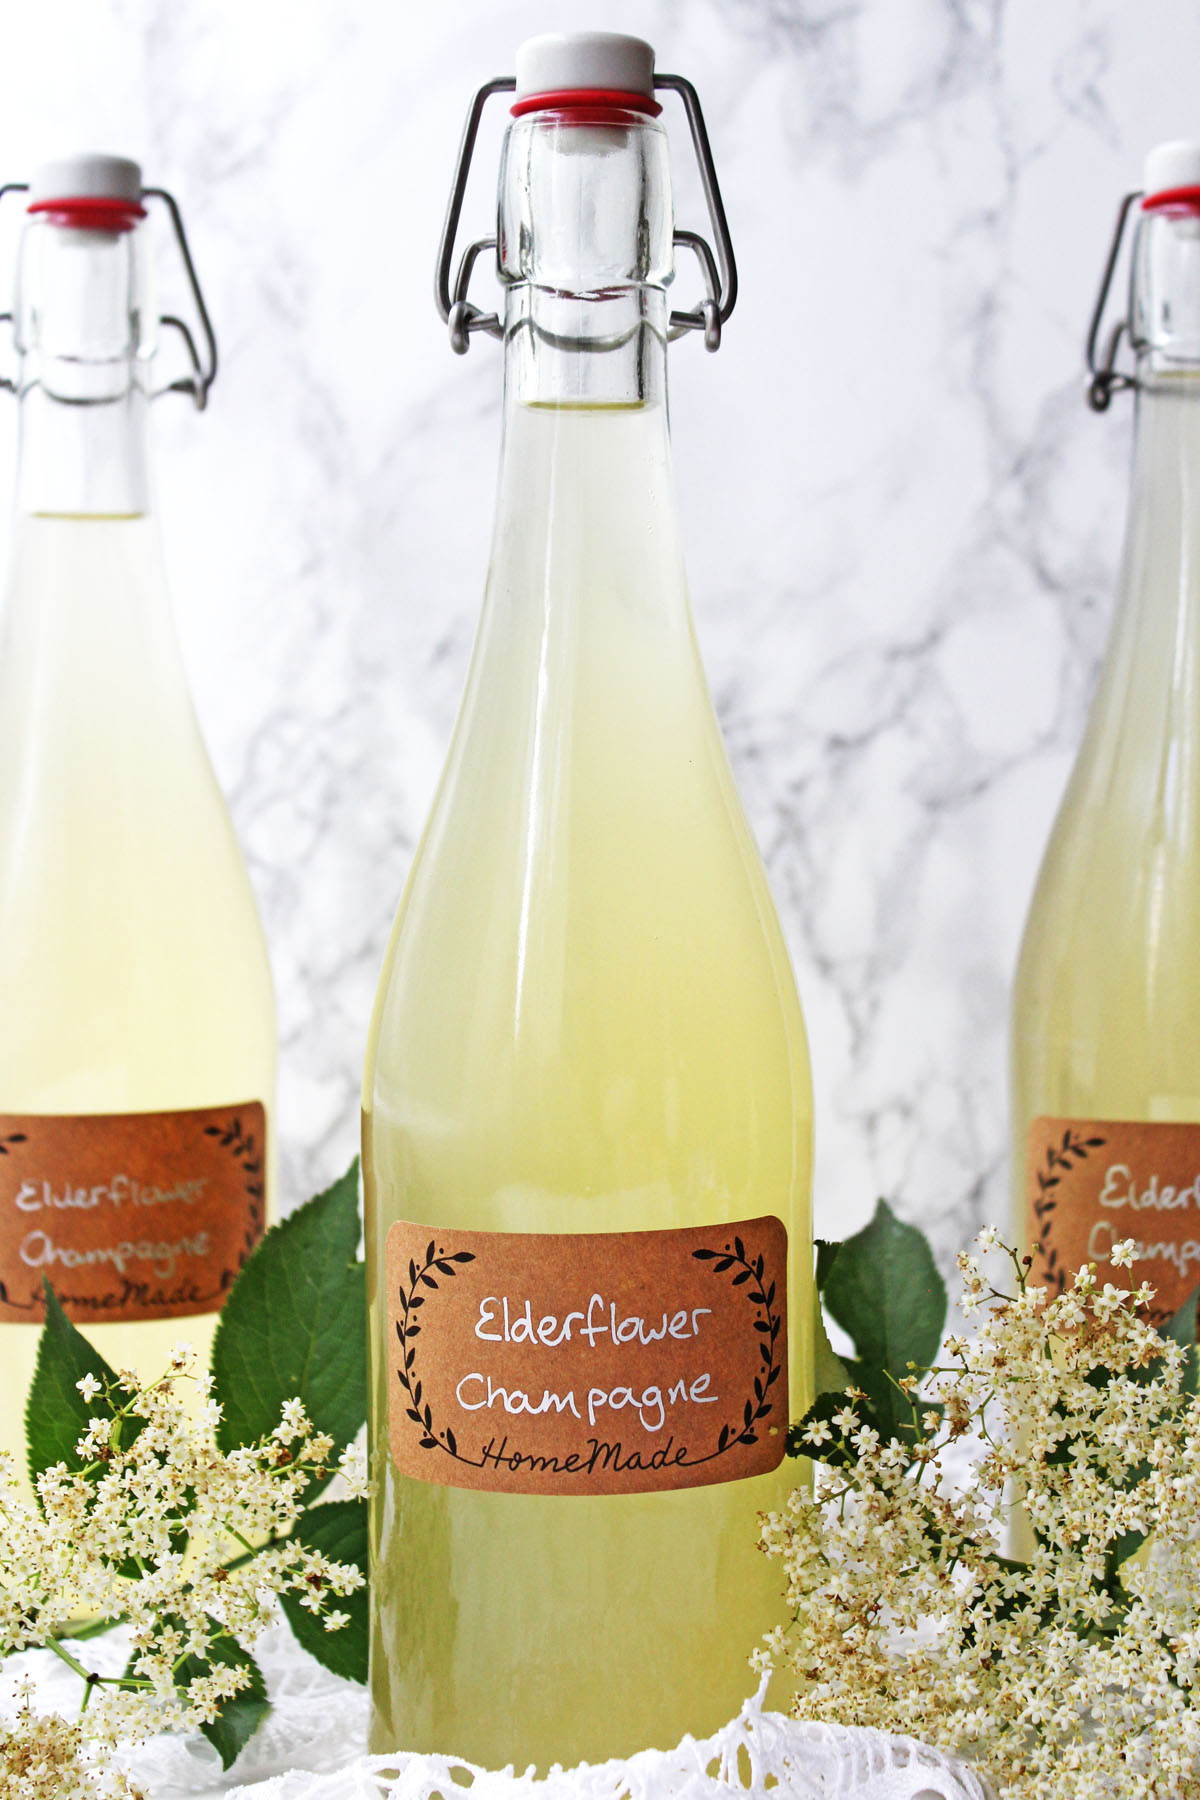 Hedgerow homebrewing doesn't have to be expensive or difficult. Find out just how easy it is to make your own Elderflower champagne from ingredients growing in a park or garden near you! Get the recipe for this fizzy wine at Supper in the Suburbs.